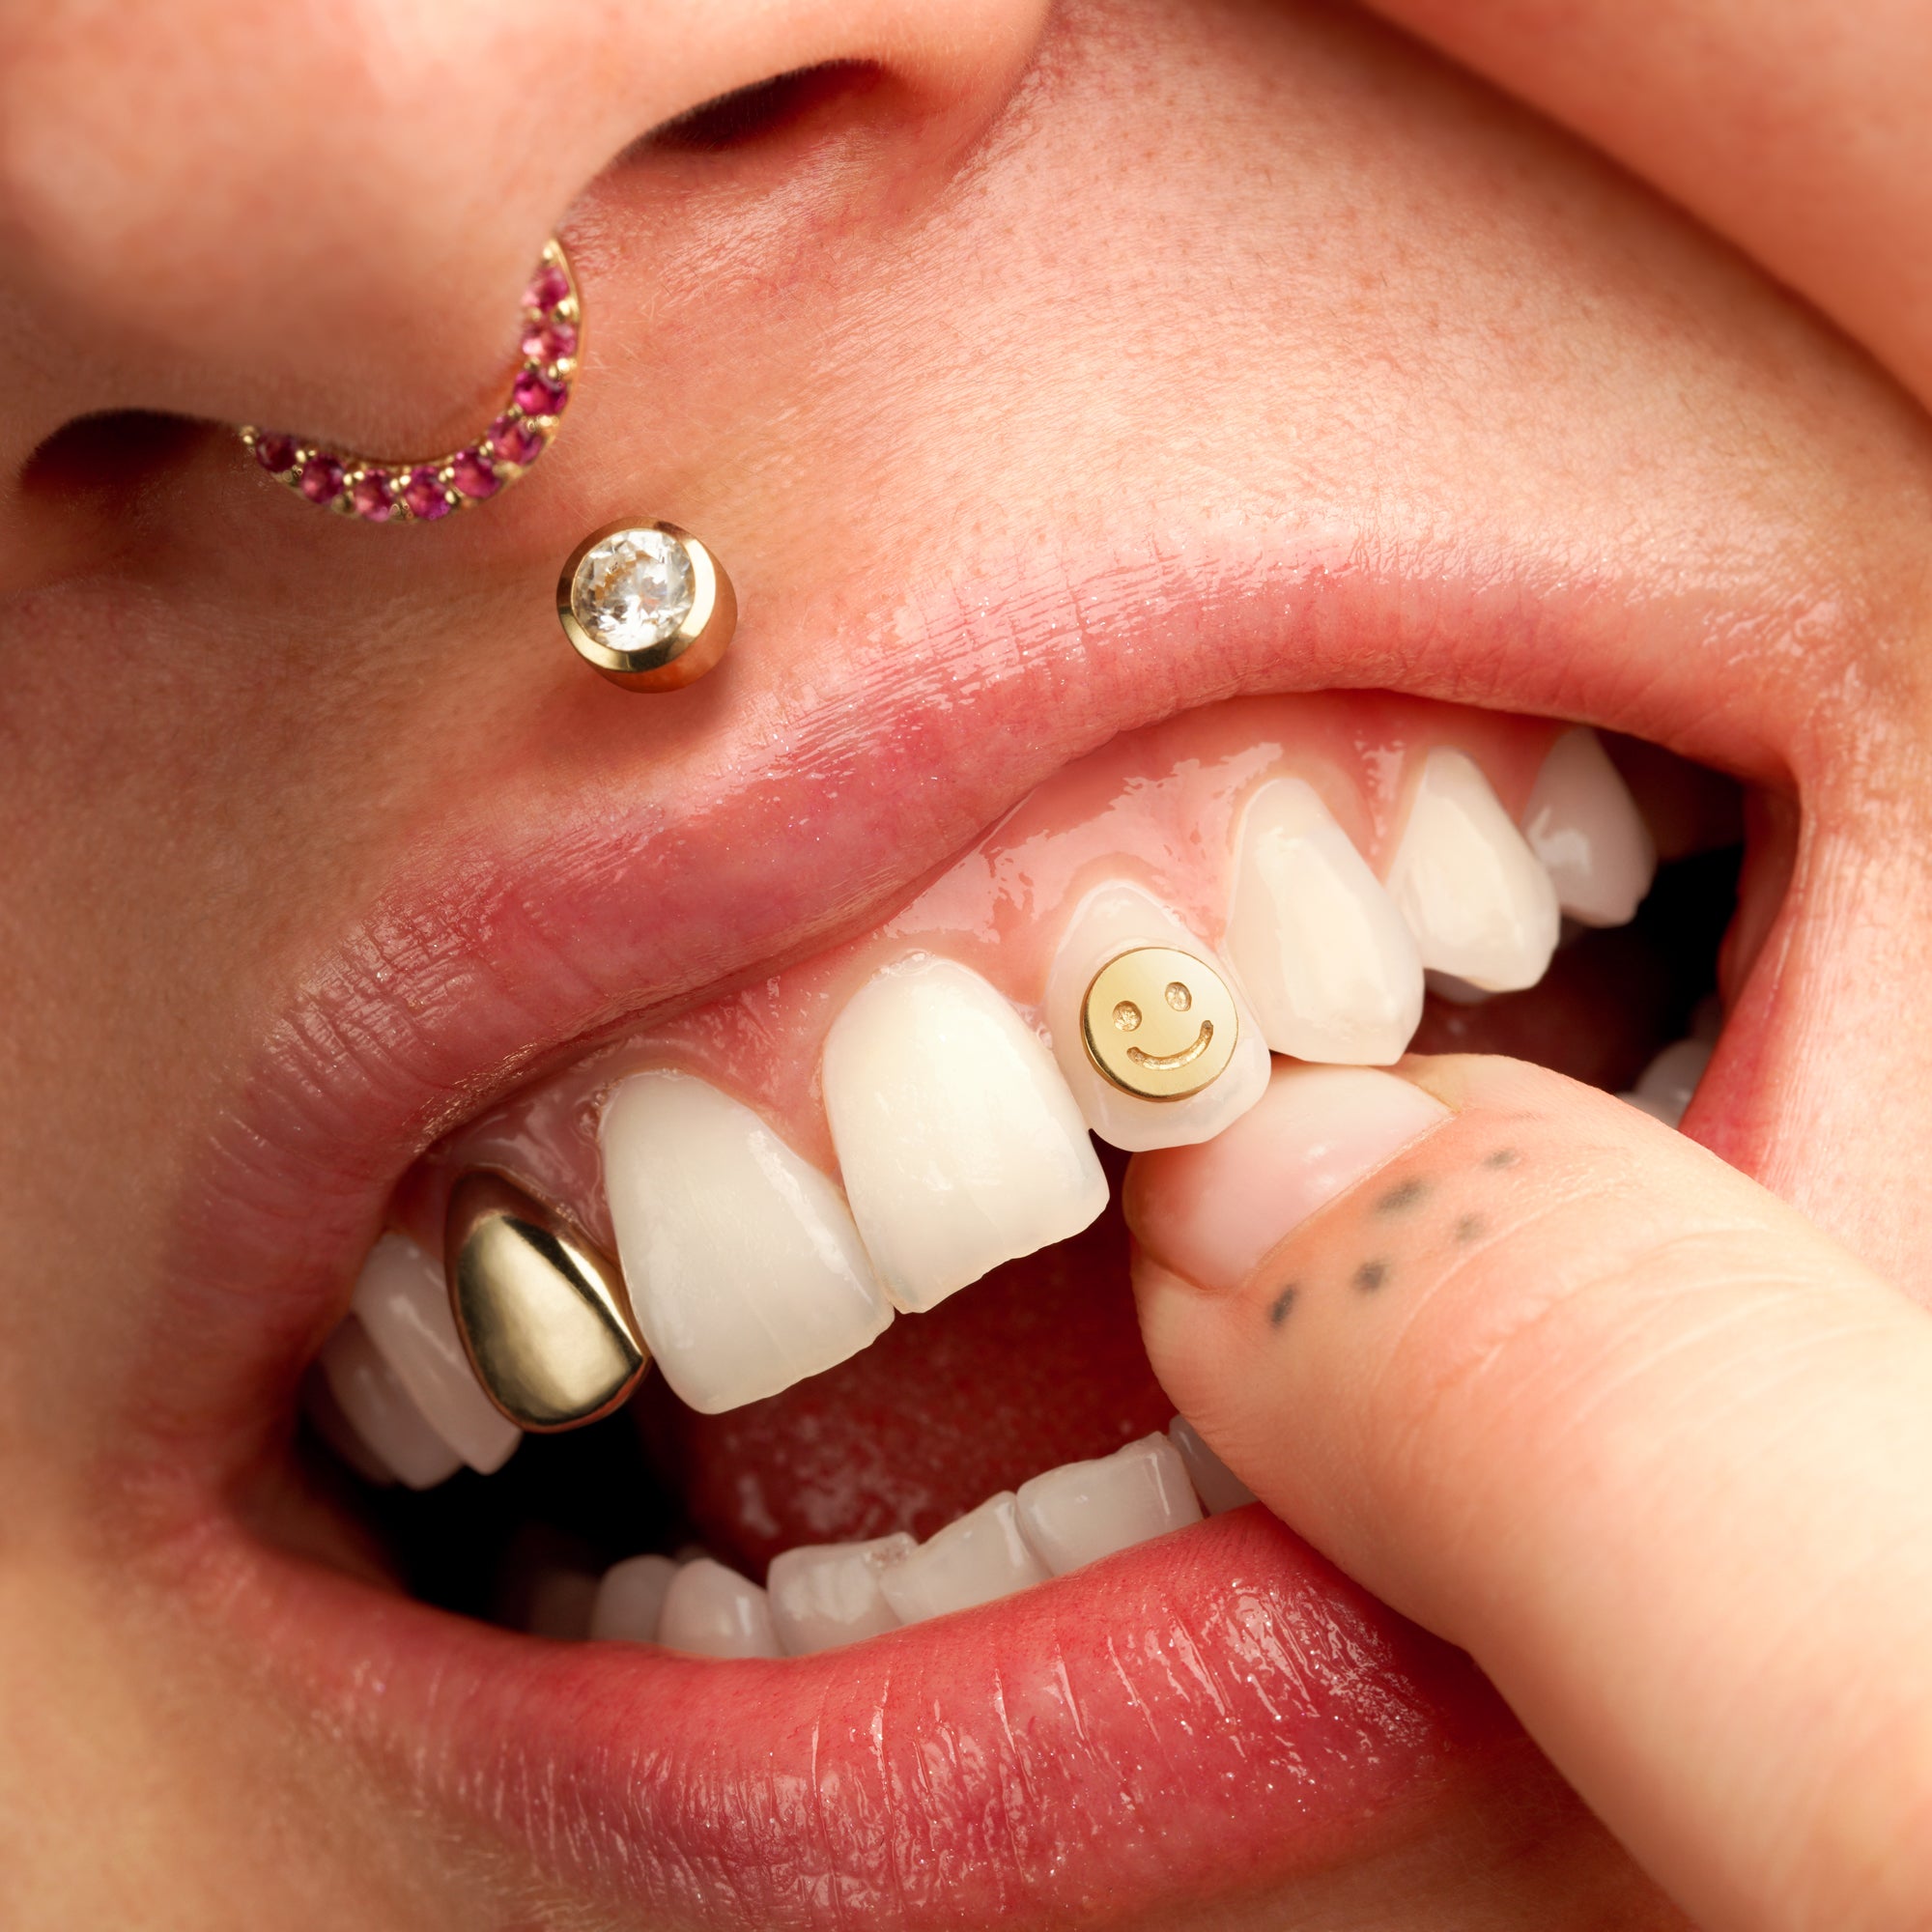 Gold tooth gems in many shapes and styles - 18 and 22 carat white and  yellow gold